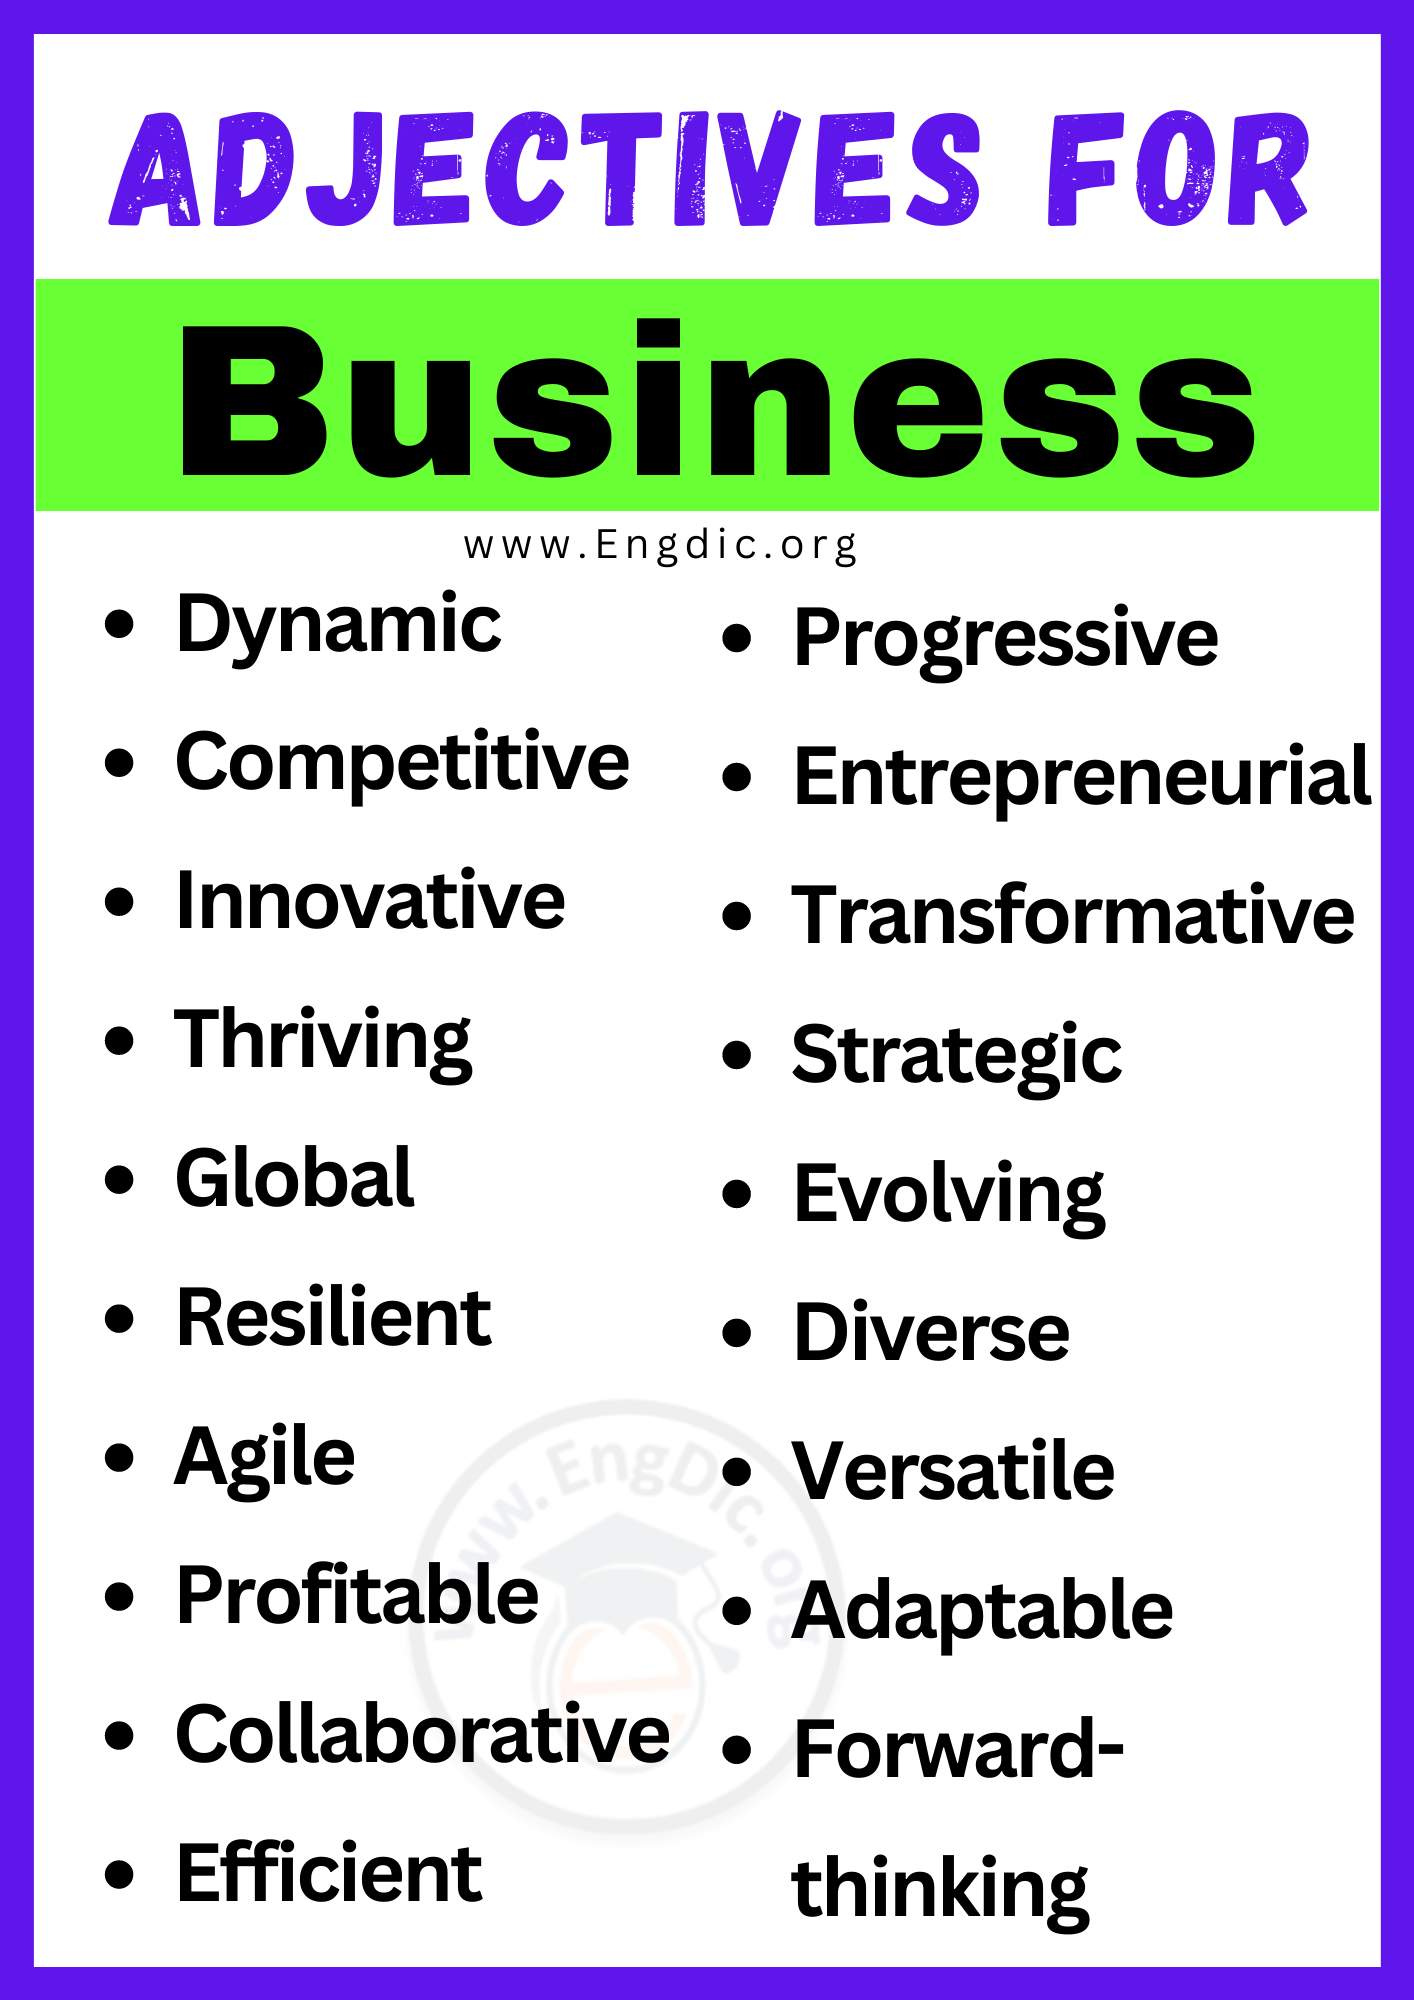 Adjectives for Business